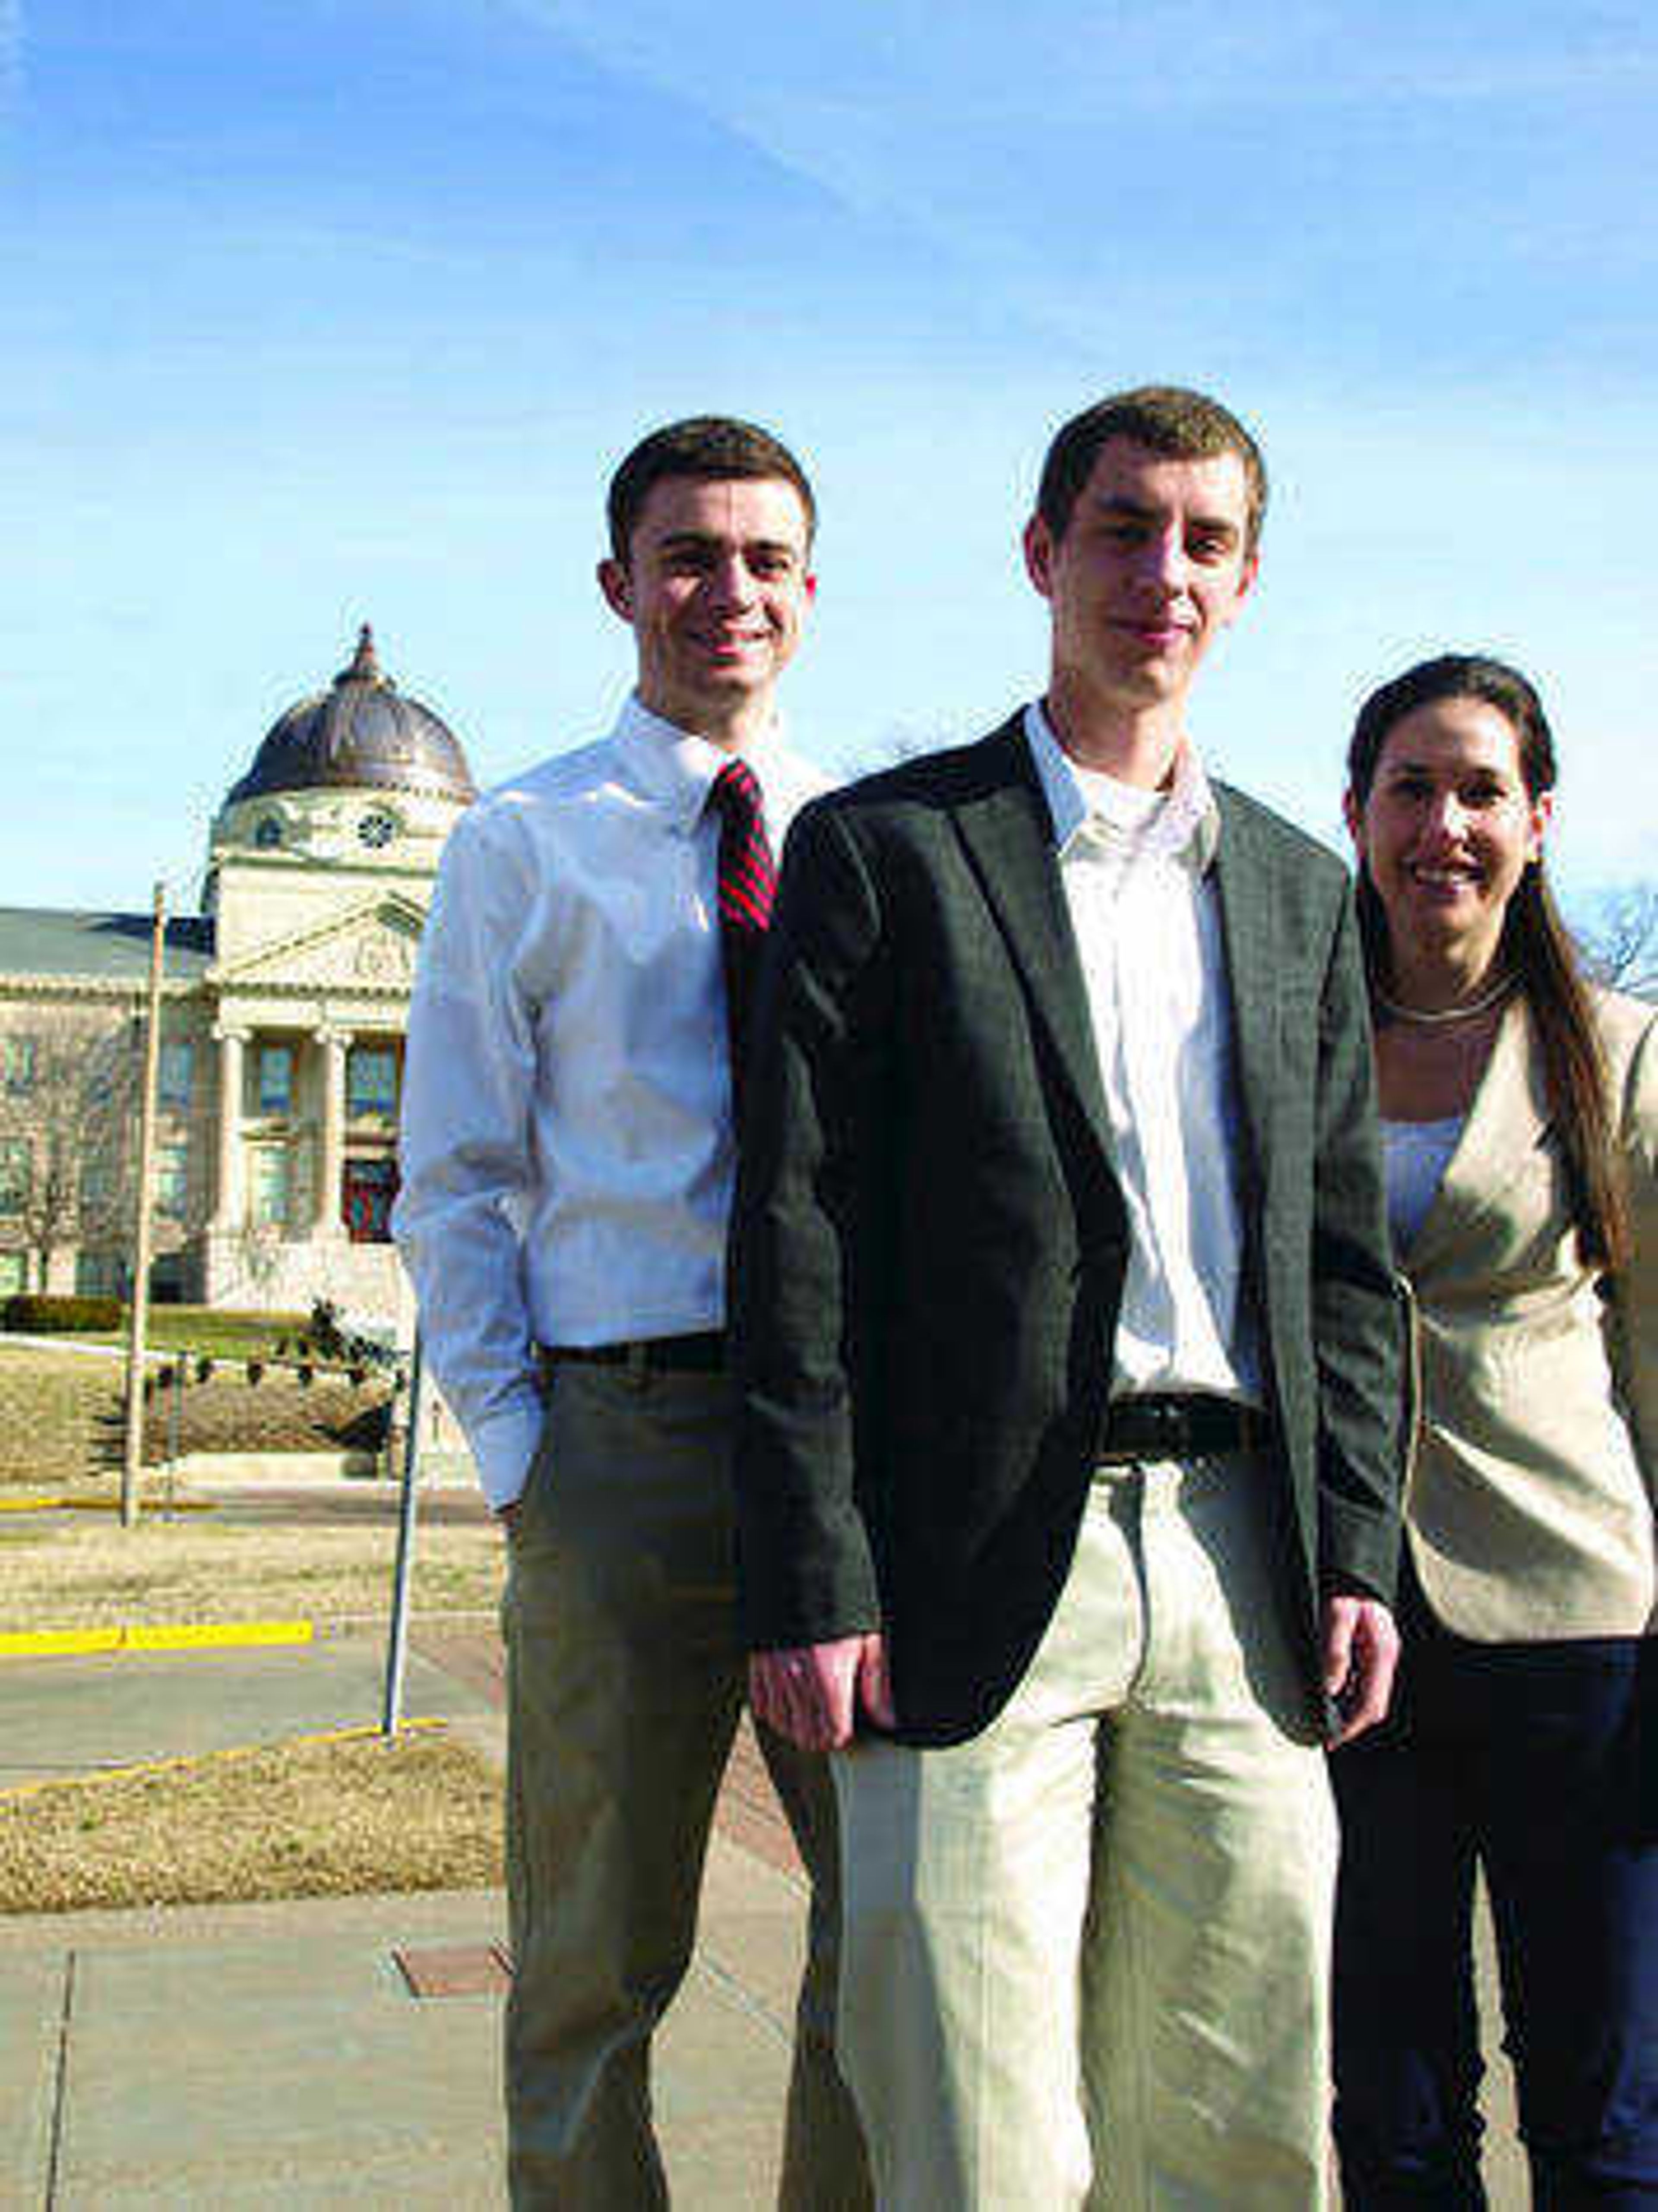 The current Student Government Association executive board members from left to right: Tyler Sayer, Caleb Cockrill and Kelsey Orf. SGA elections will take place March 31 and April 1. Submitted photo